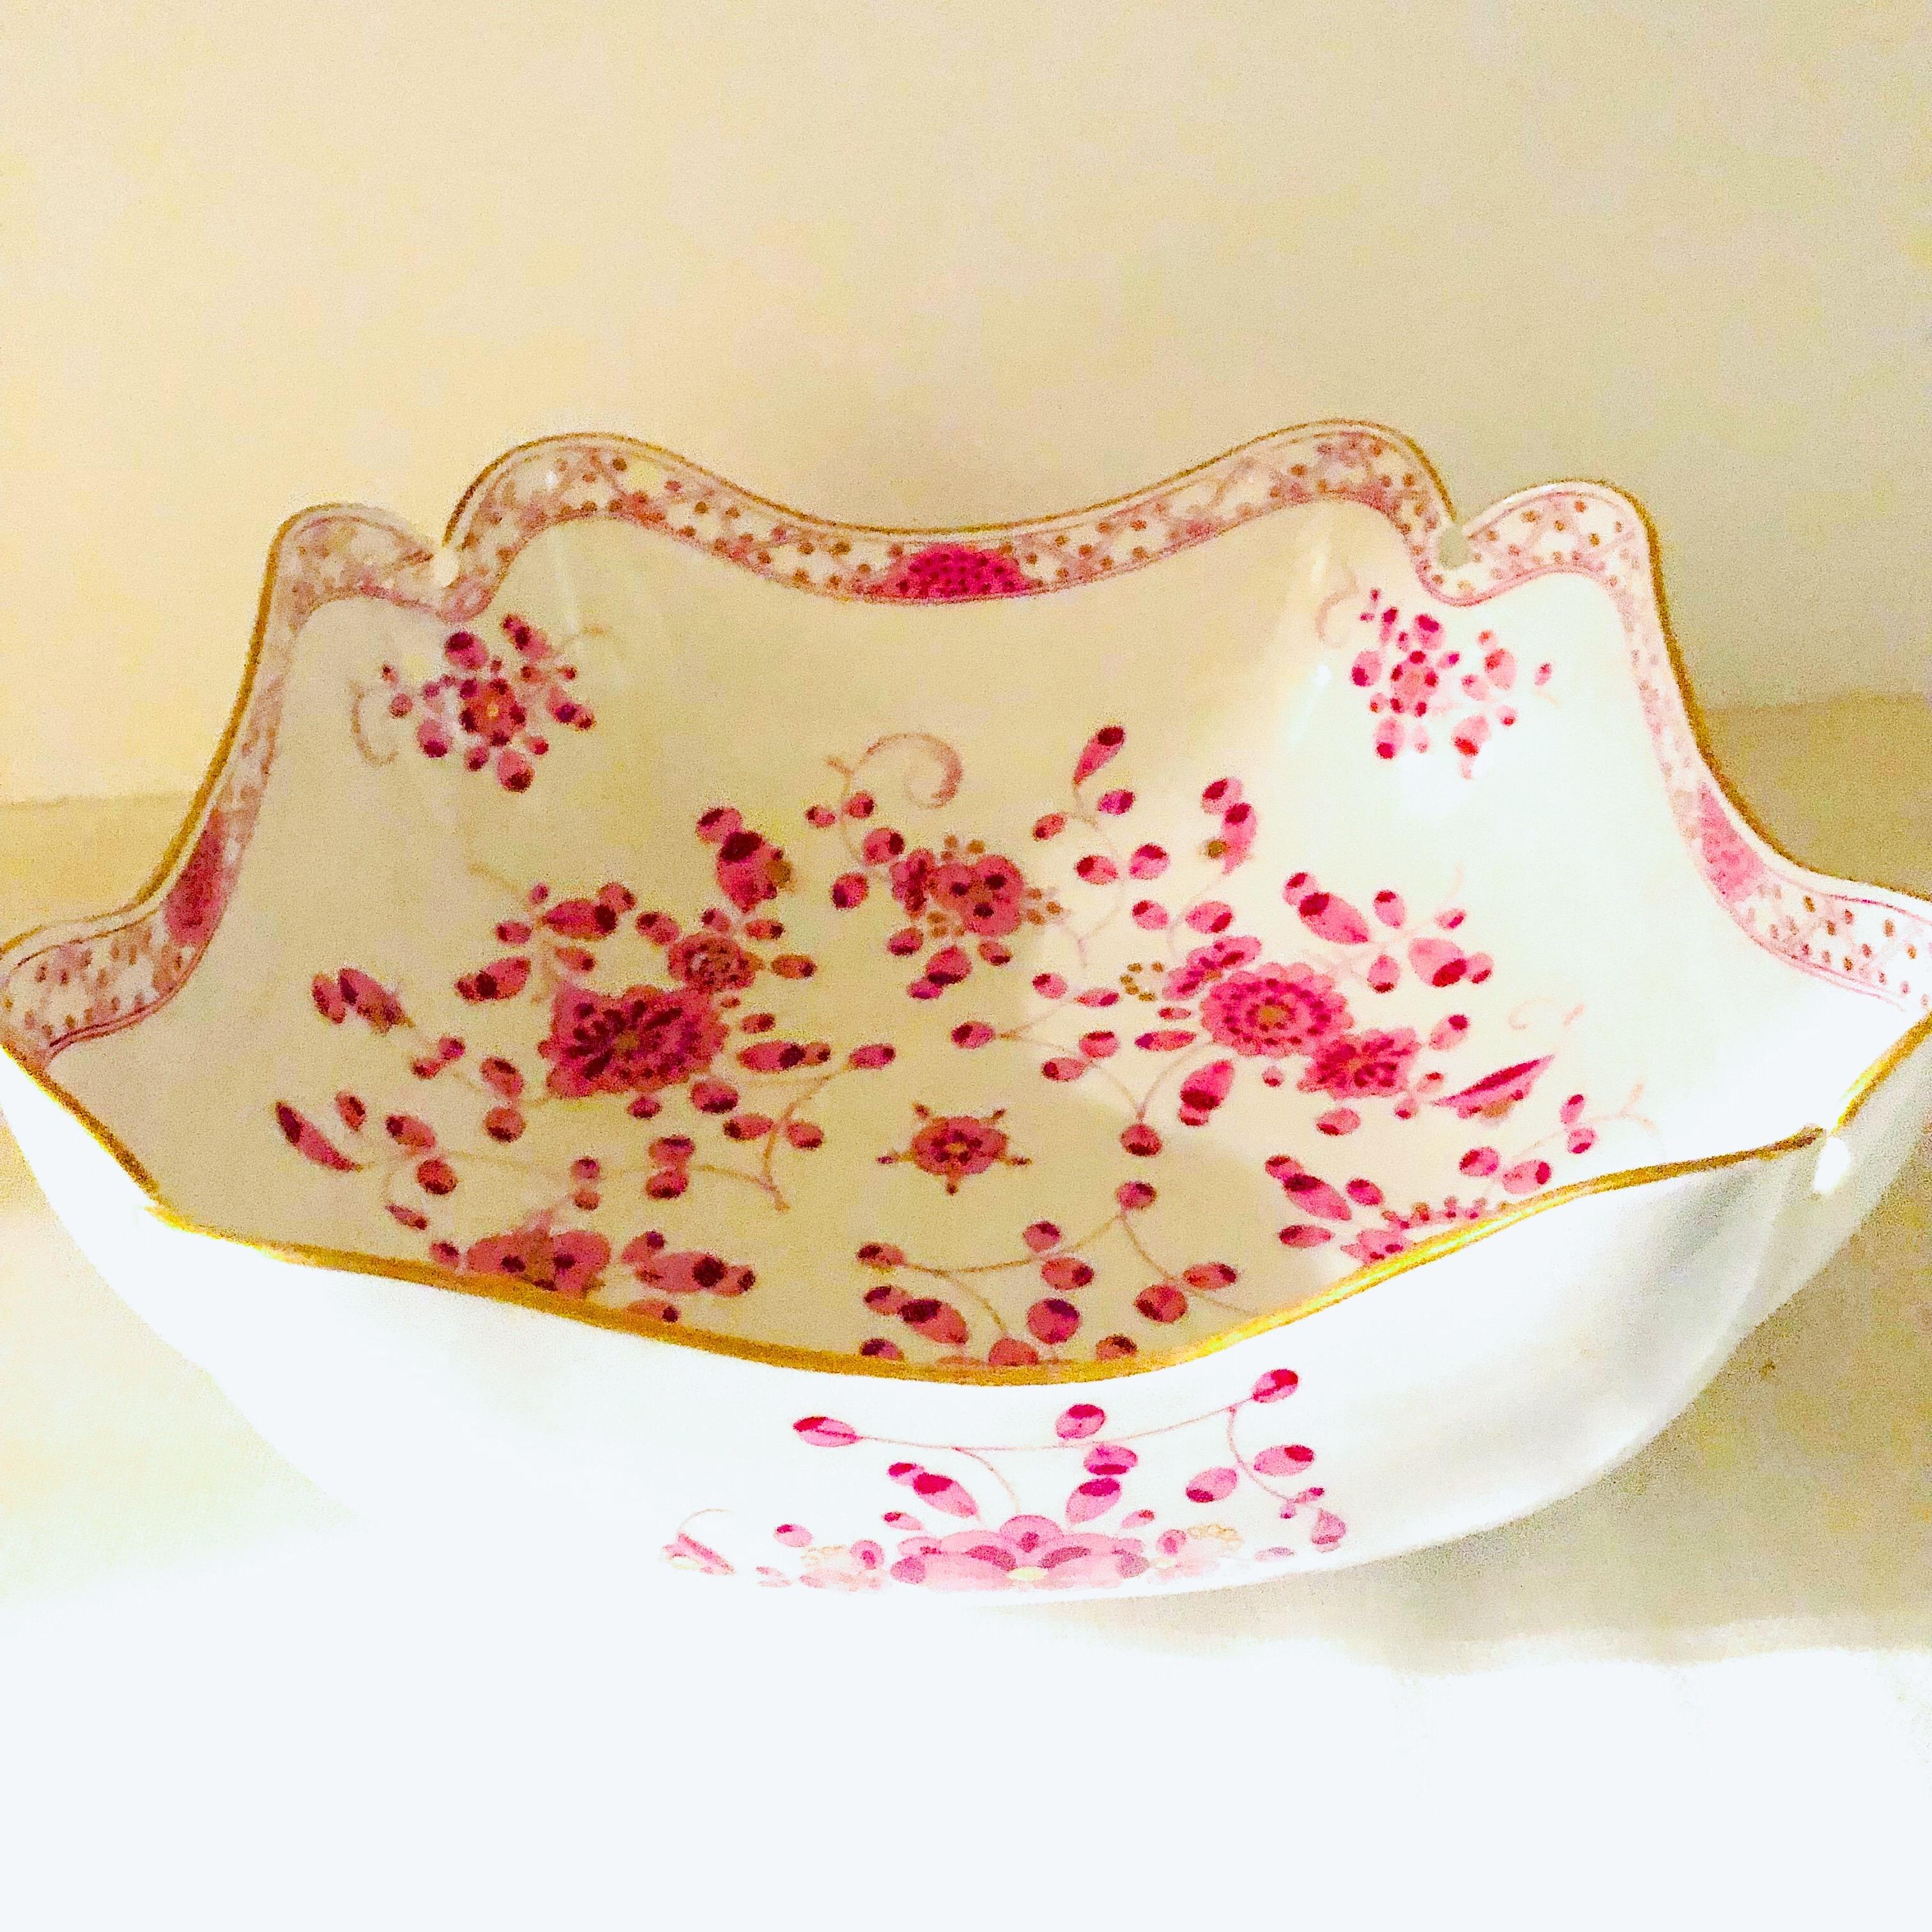 This is a fabulous Meissen purple Indian four cornered bowl from the 1890s. I love this unusual hard to find shape that Meissen makes for its serving bowls called a four cornered bowl. This is a large bowl as it is 9.5 inches wide. It has detailed